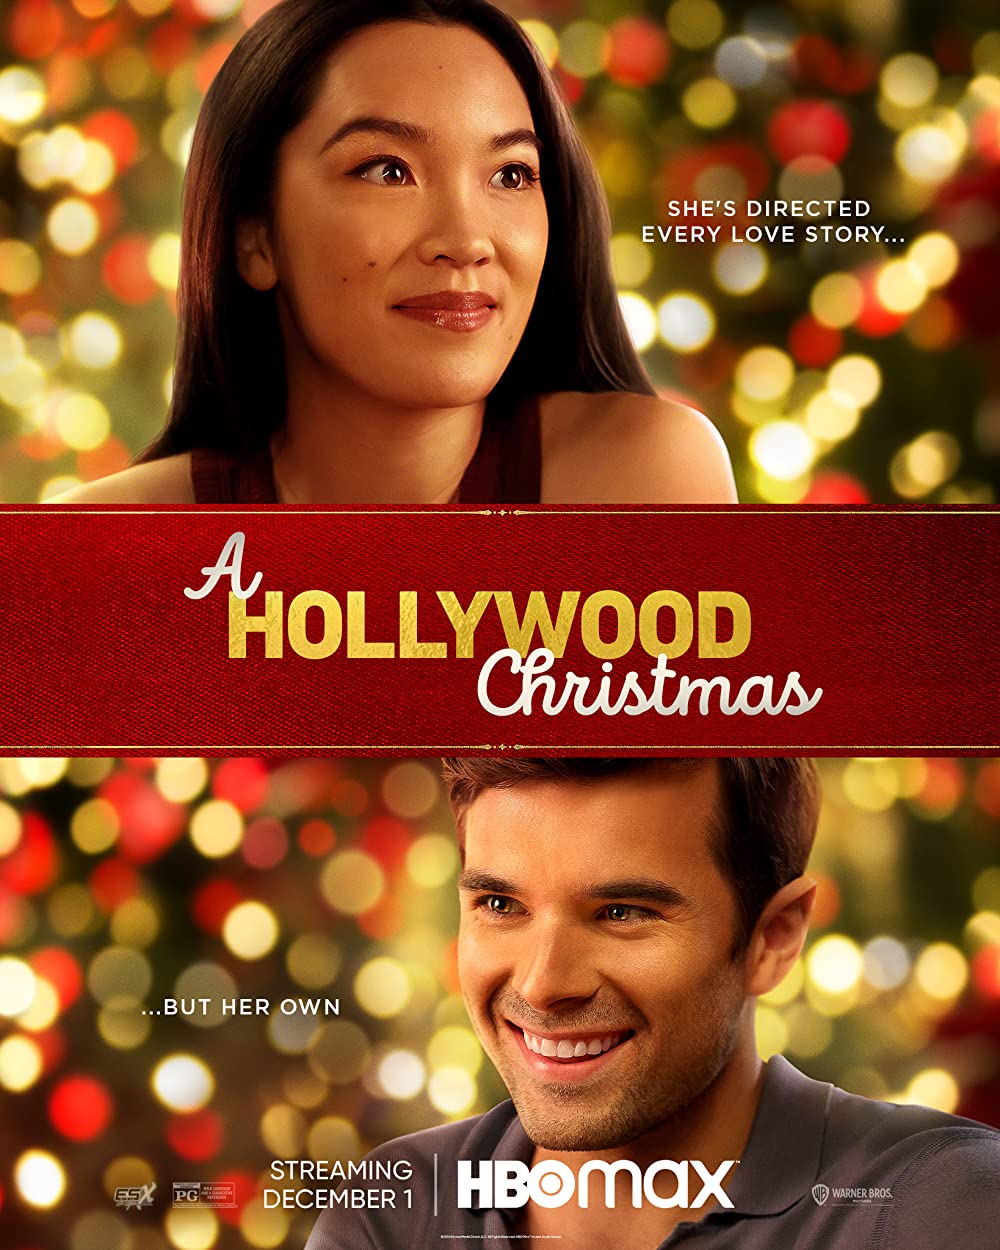 A Hollywood Christmas Parents Guide | A Hollywood Christmas Rating 2022